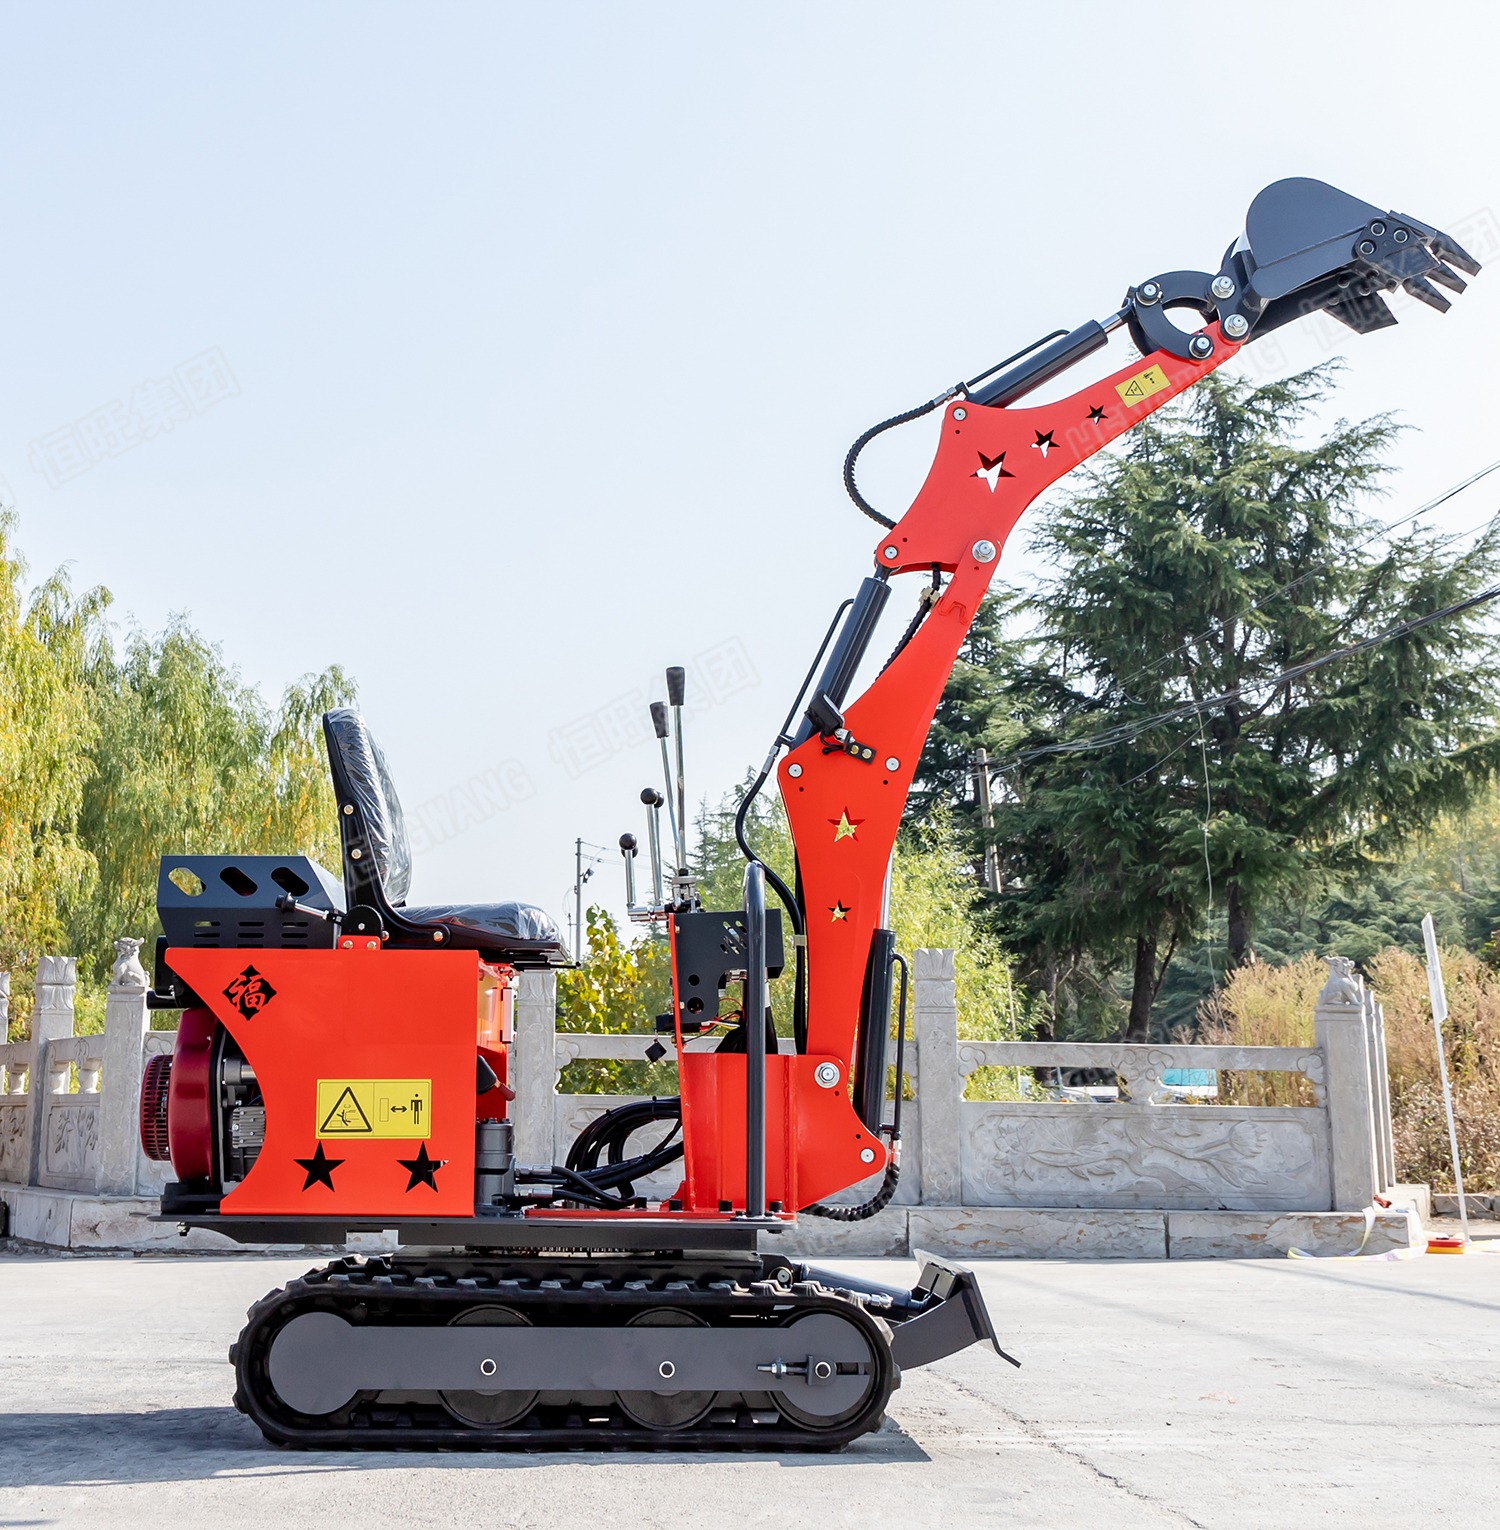 How to choose an orchard mini excavator?